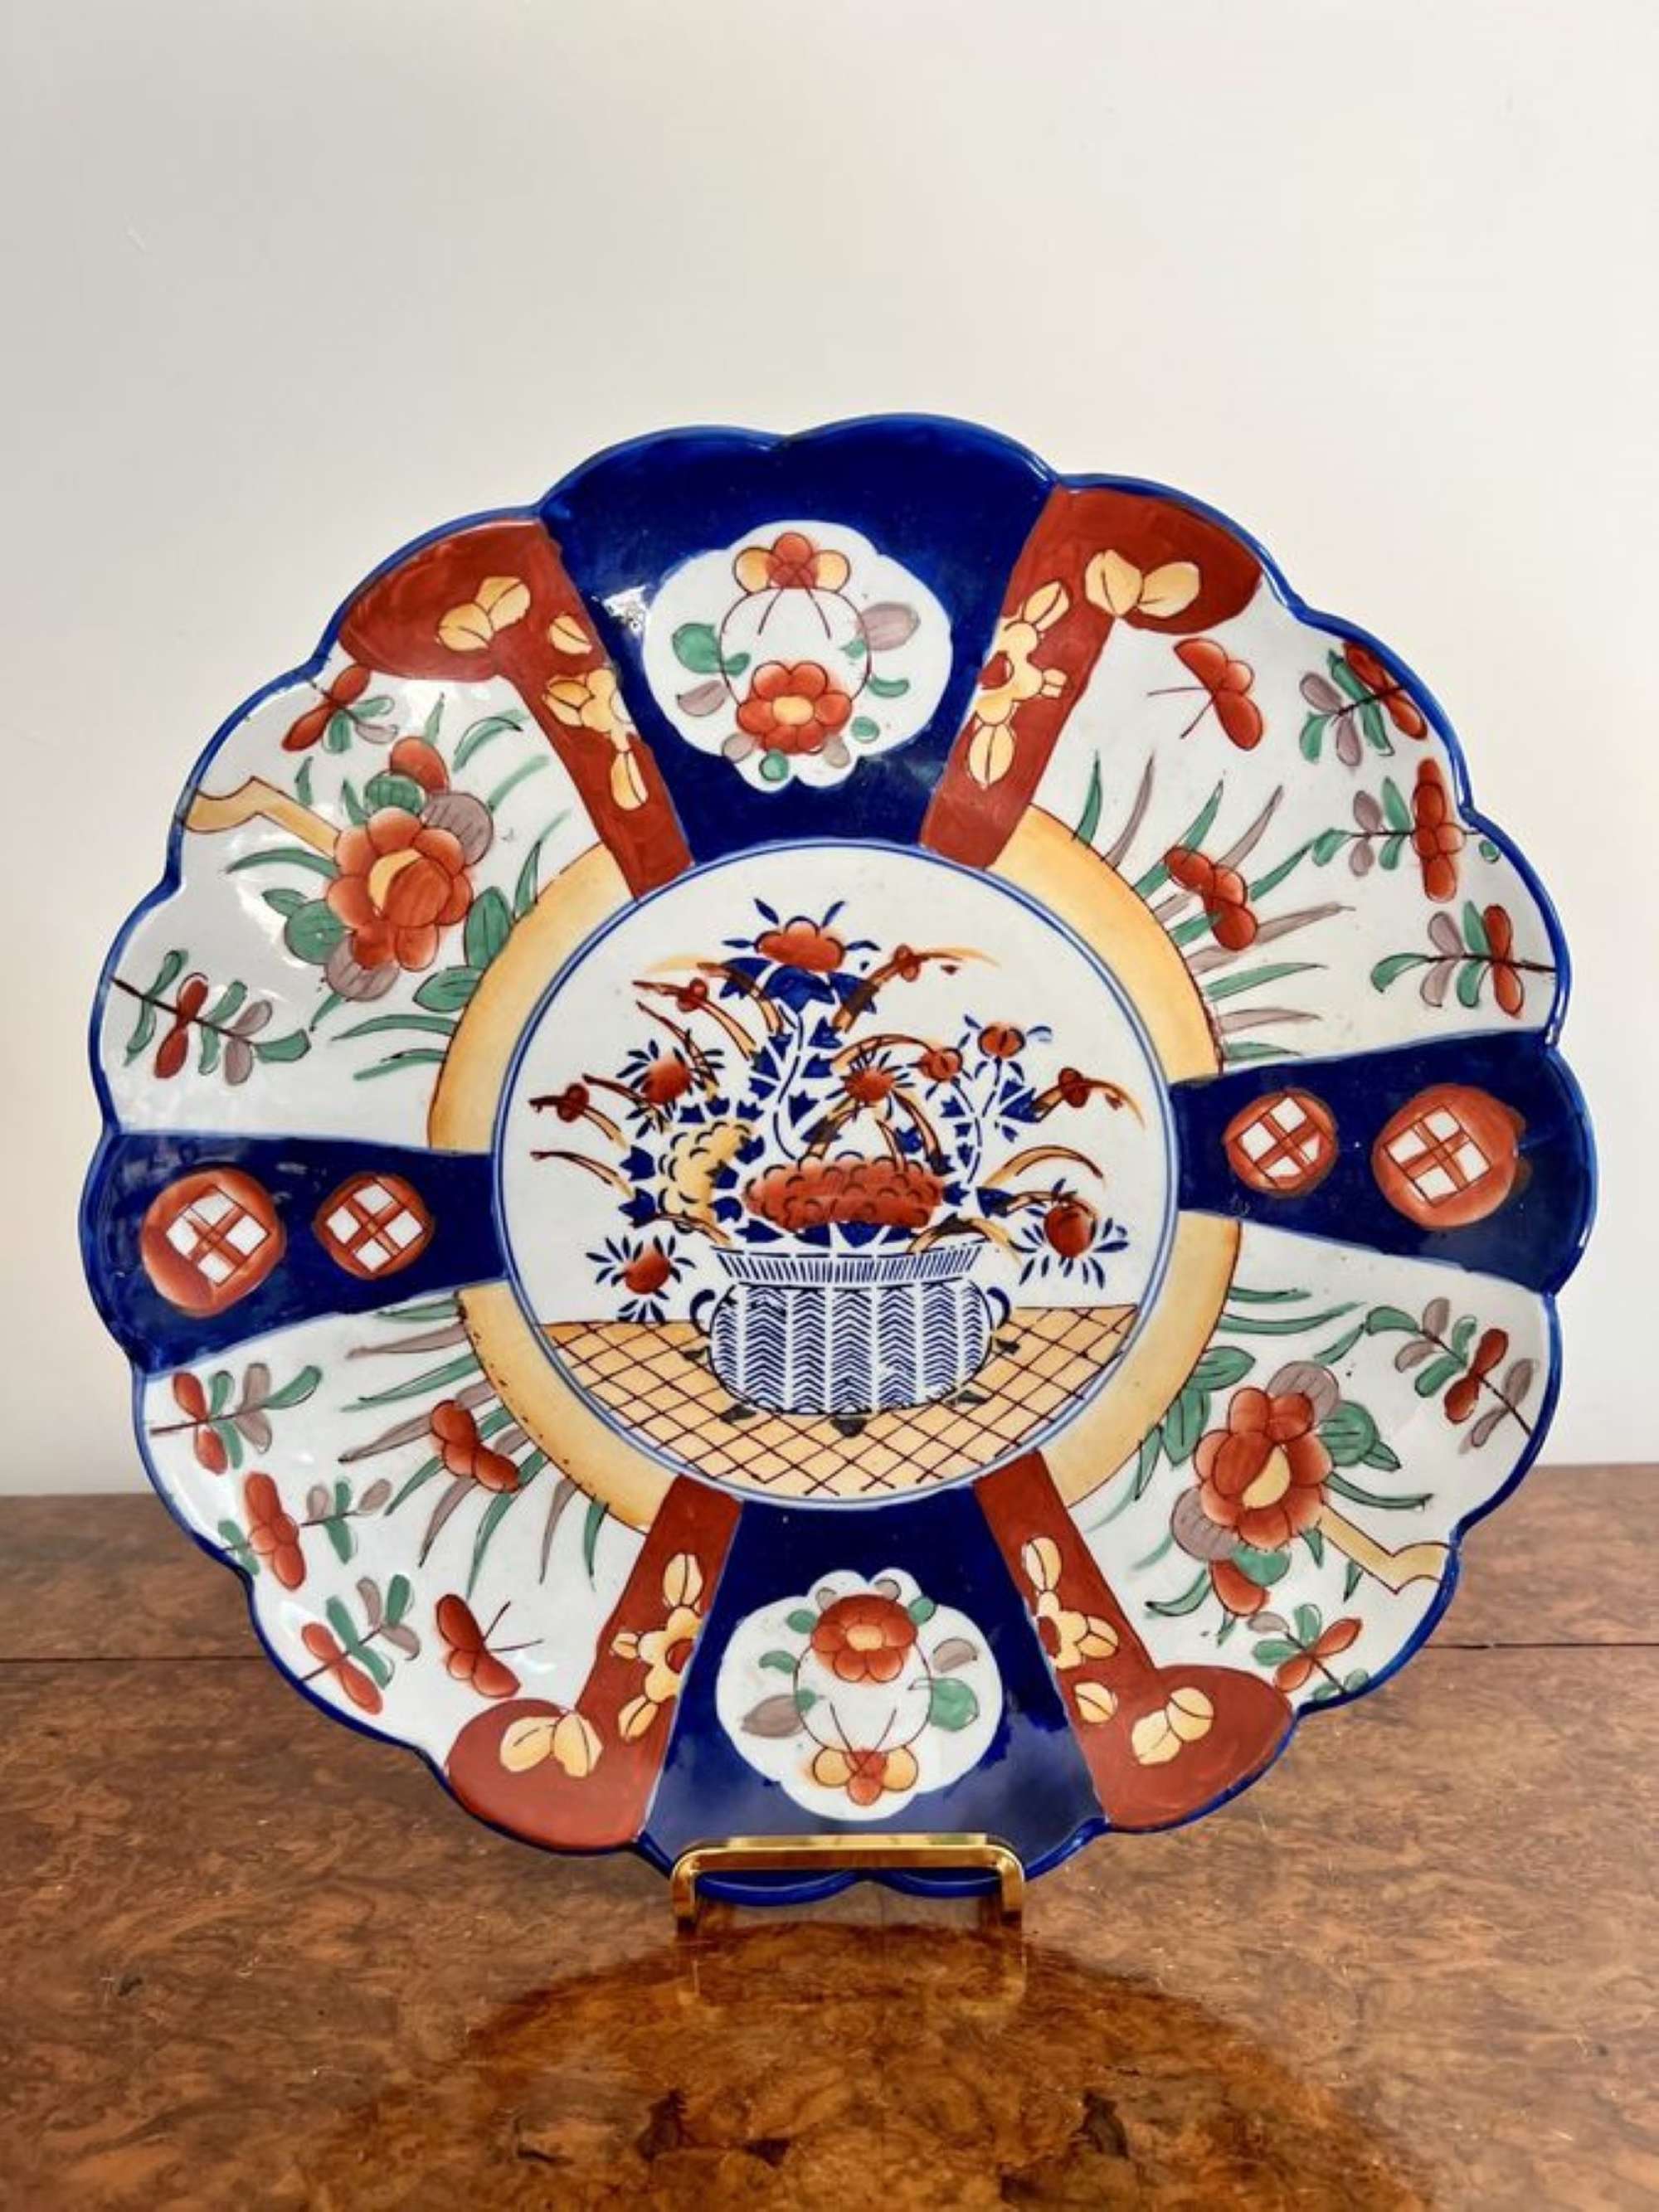 Quality antique Japanese imari plate with a scallop shaped edge